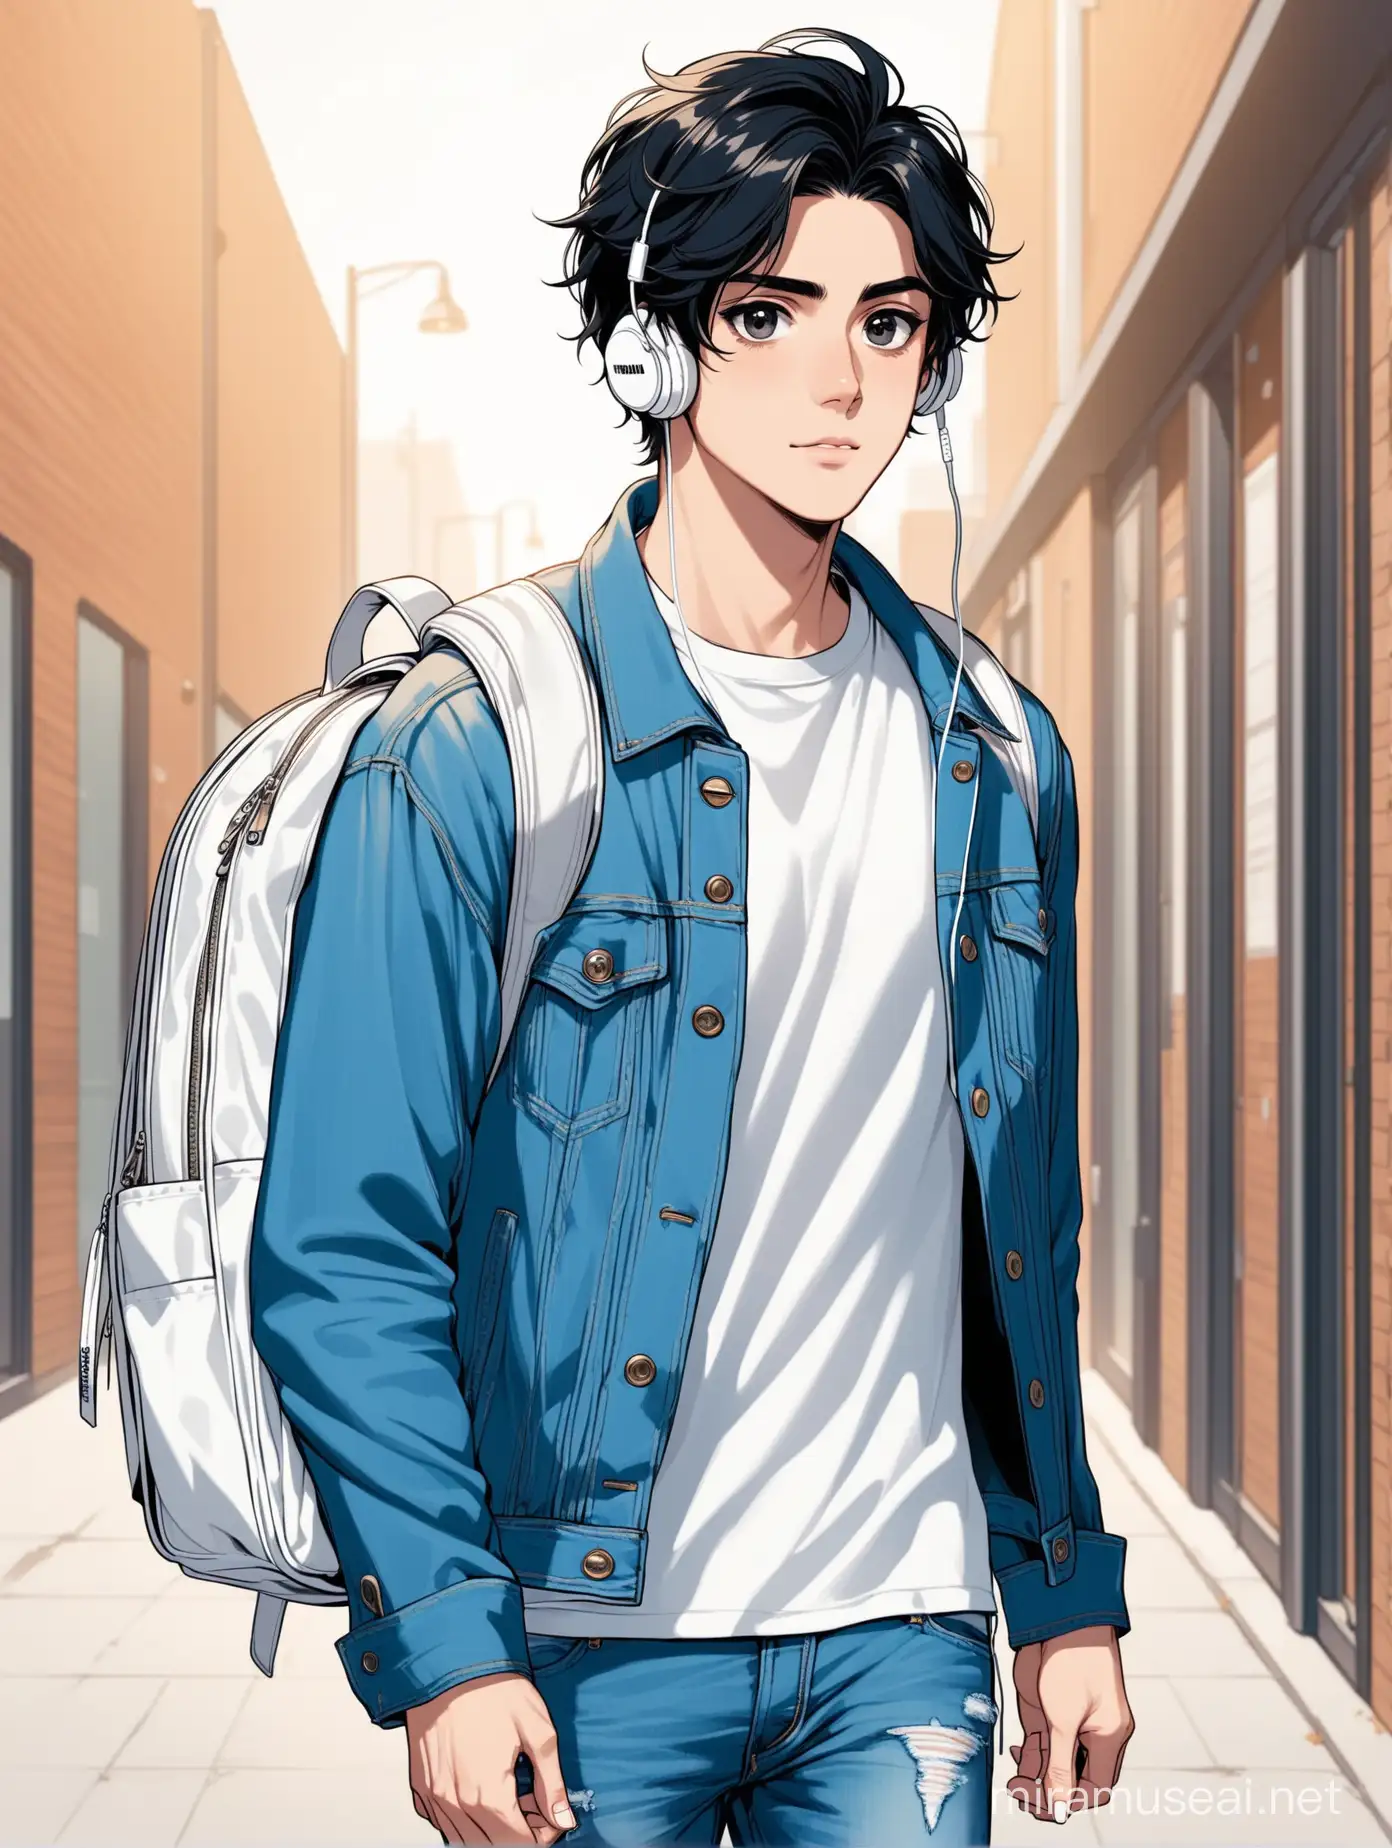 Stylish Young Man in Casual Urban Outfit with White Backpack and Wired Earbuds